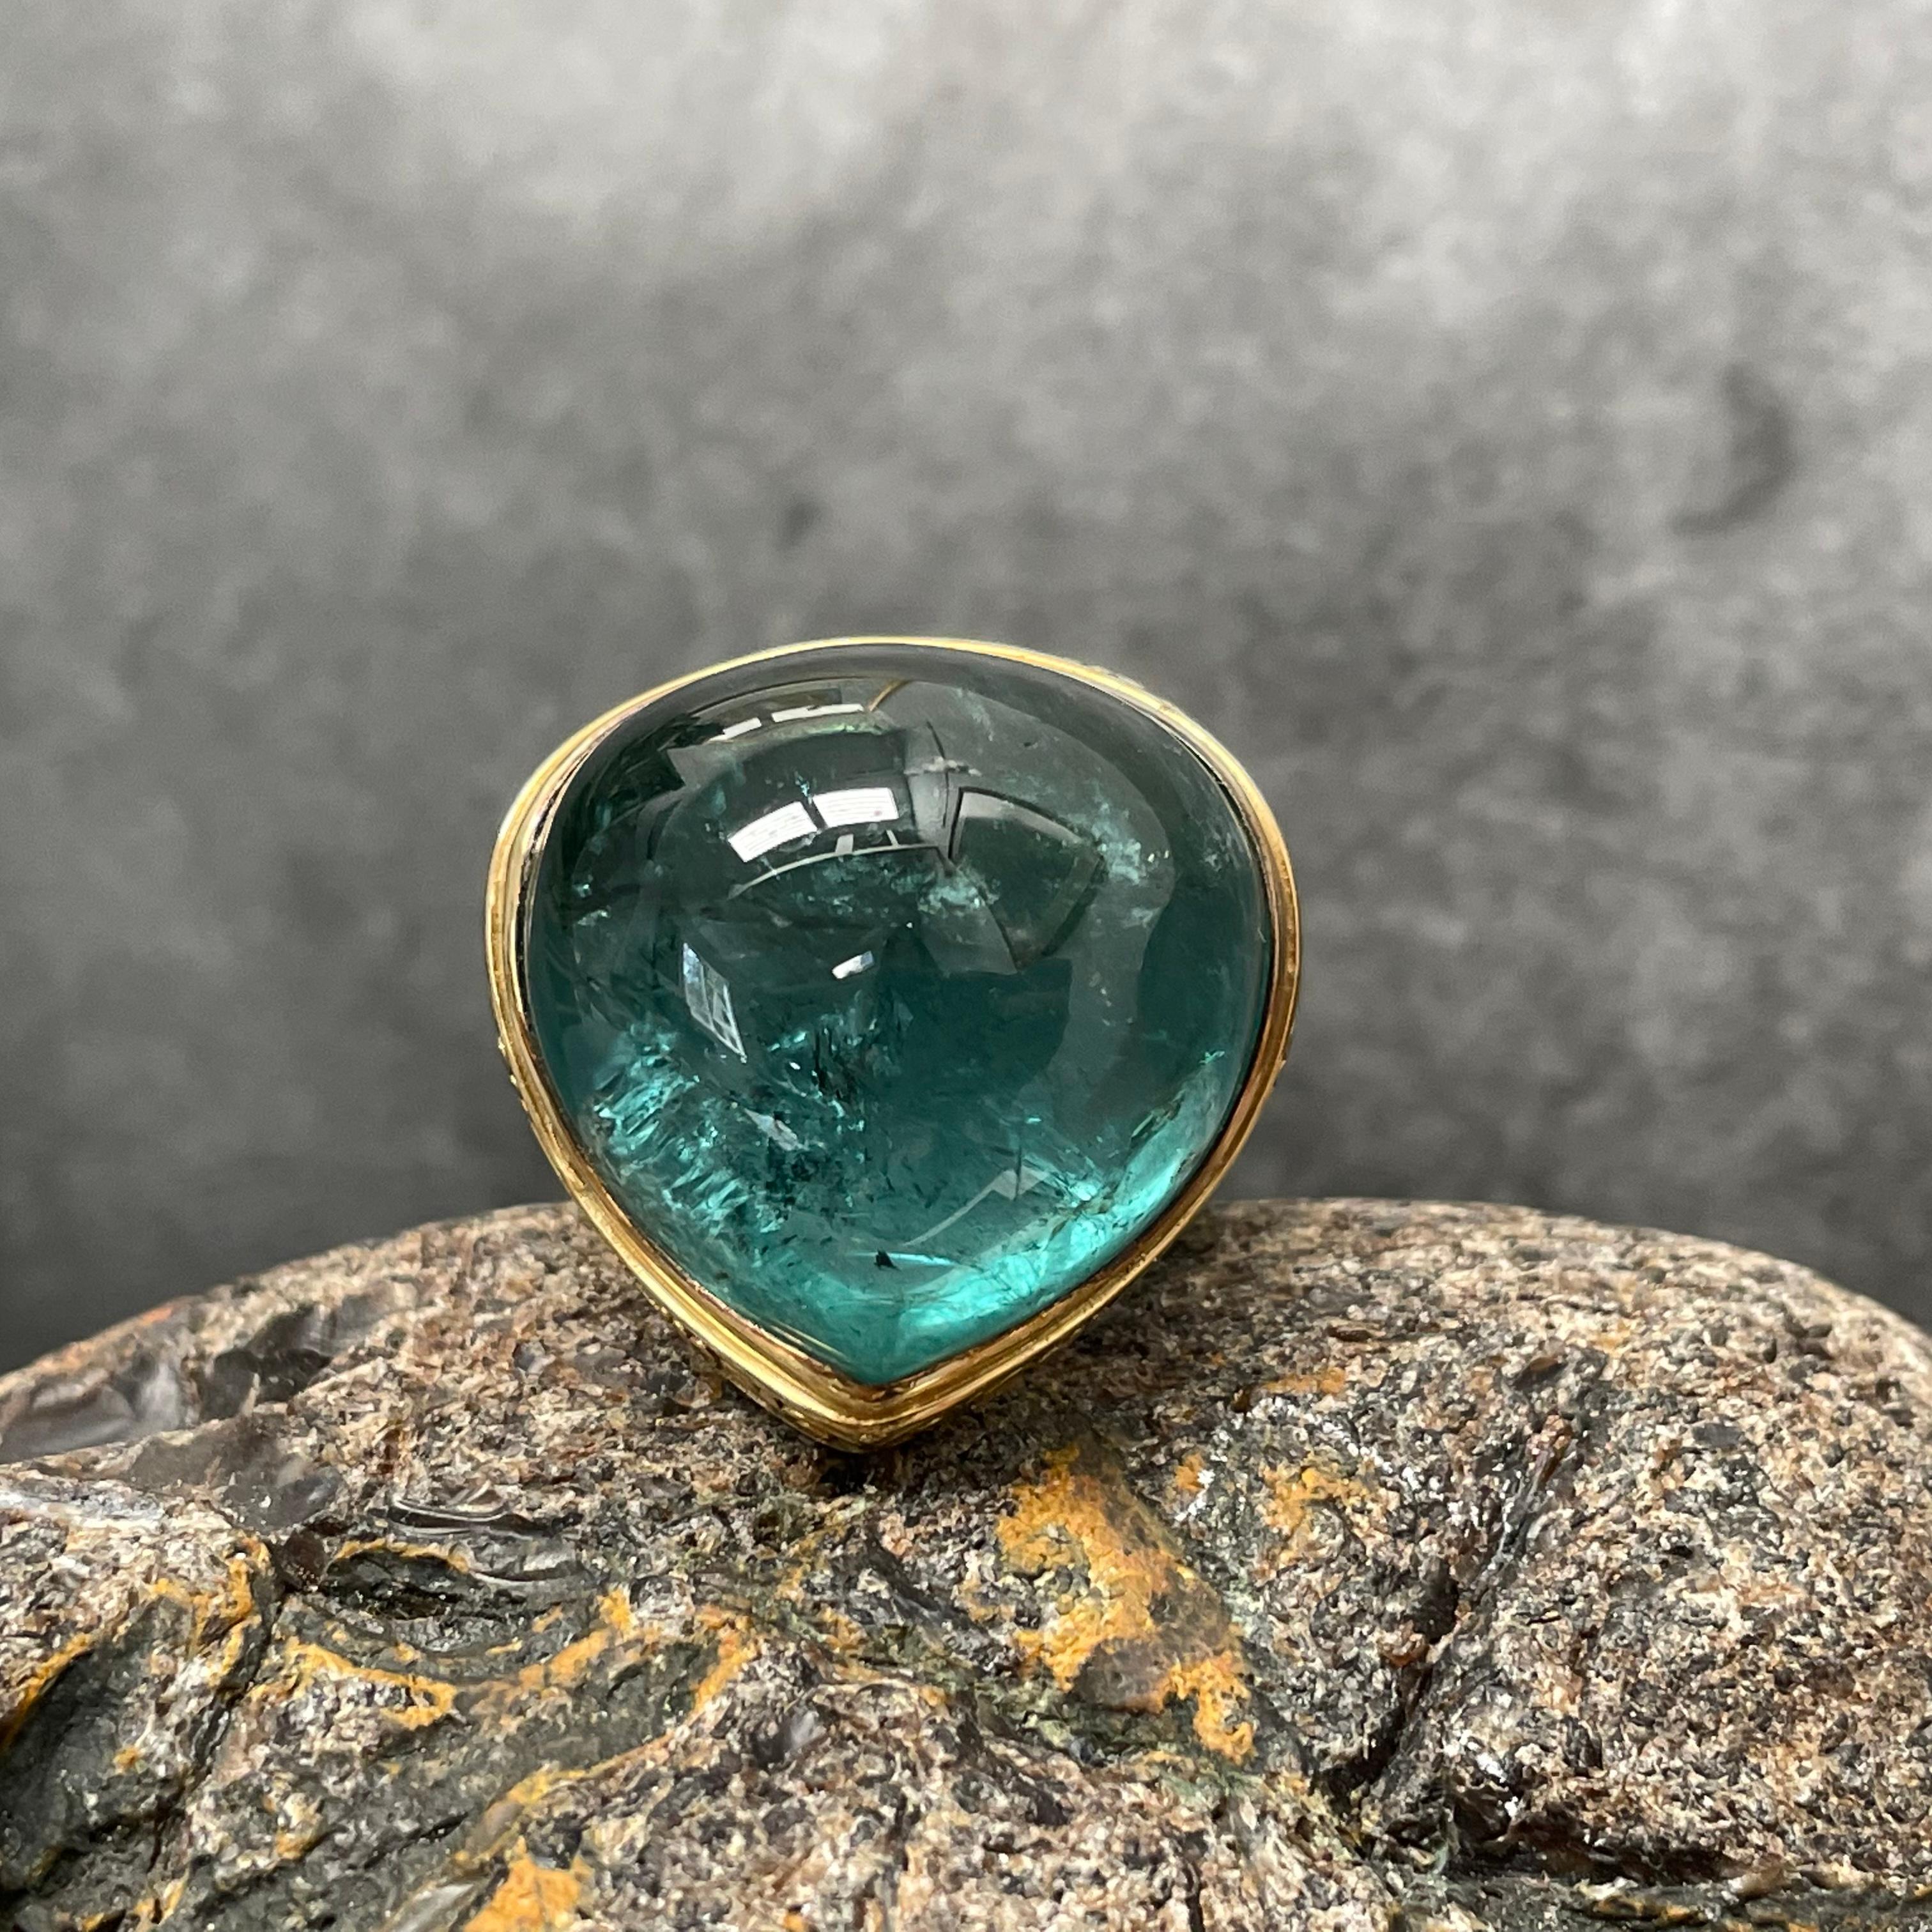 Steven Battelle 60.0 Carats Blue-Green Indicolite Tourmaline 18K Gold Ring In New Condition For Sale In Soquel, CA